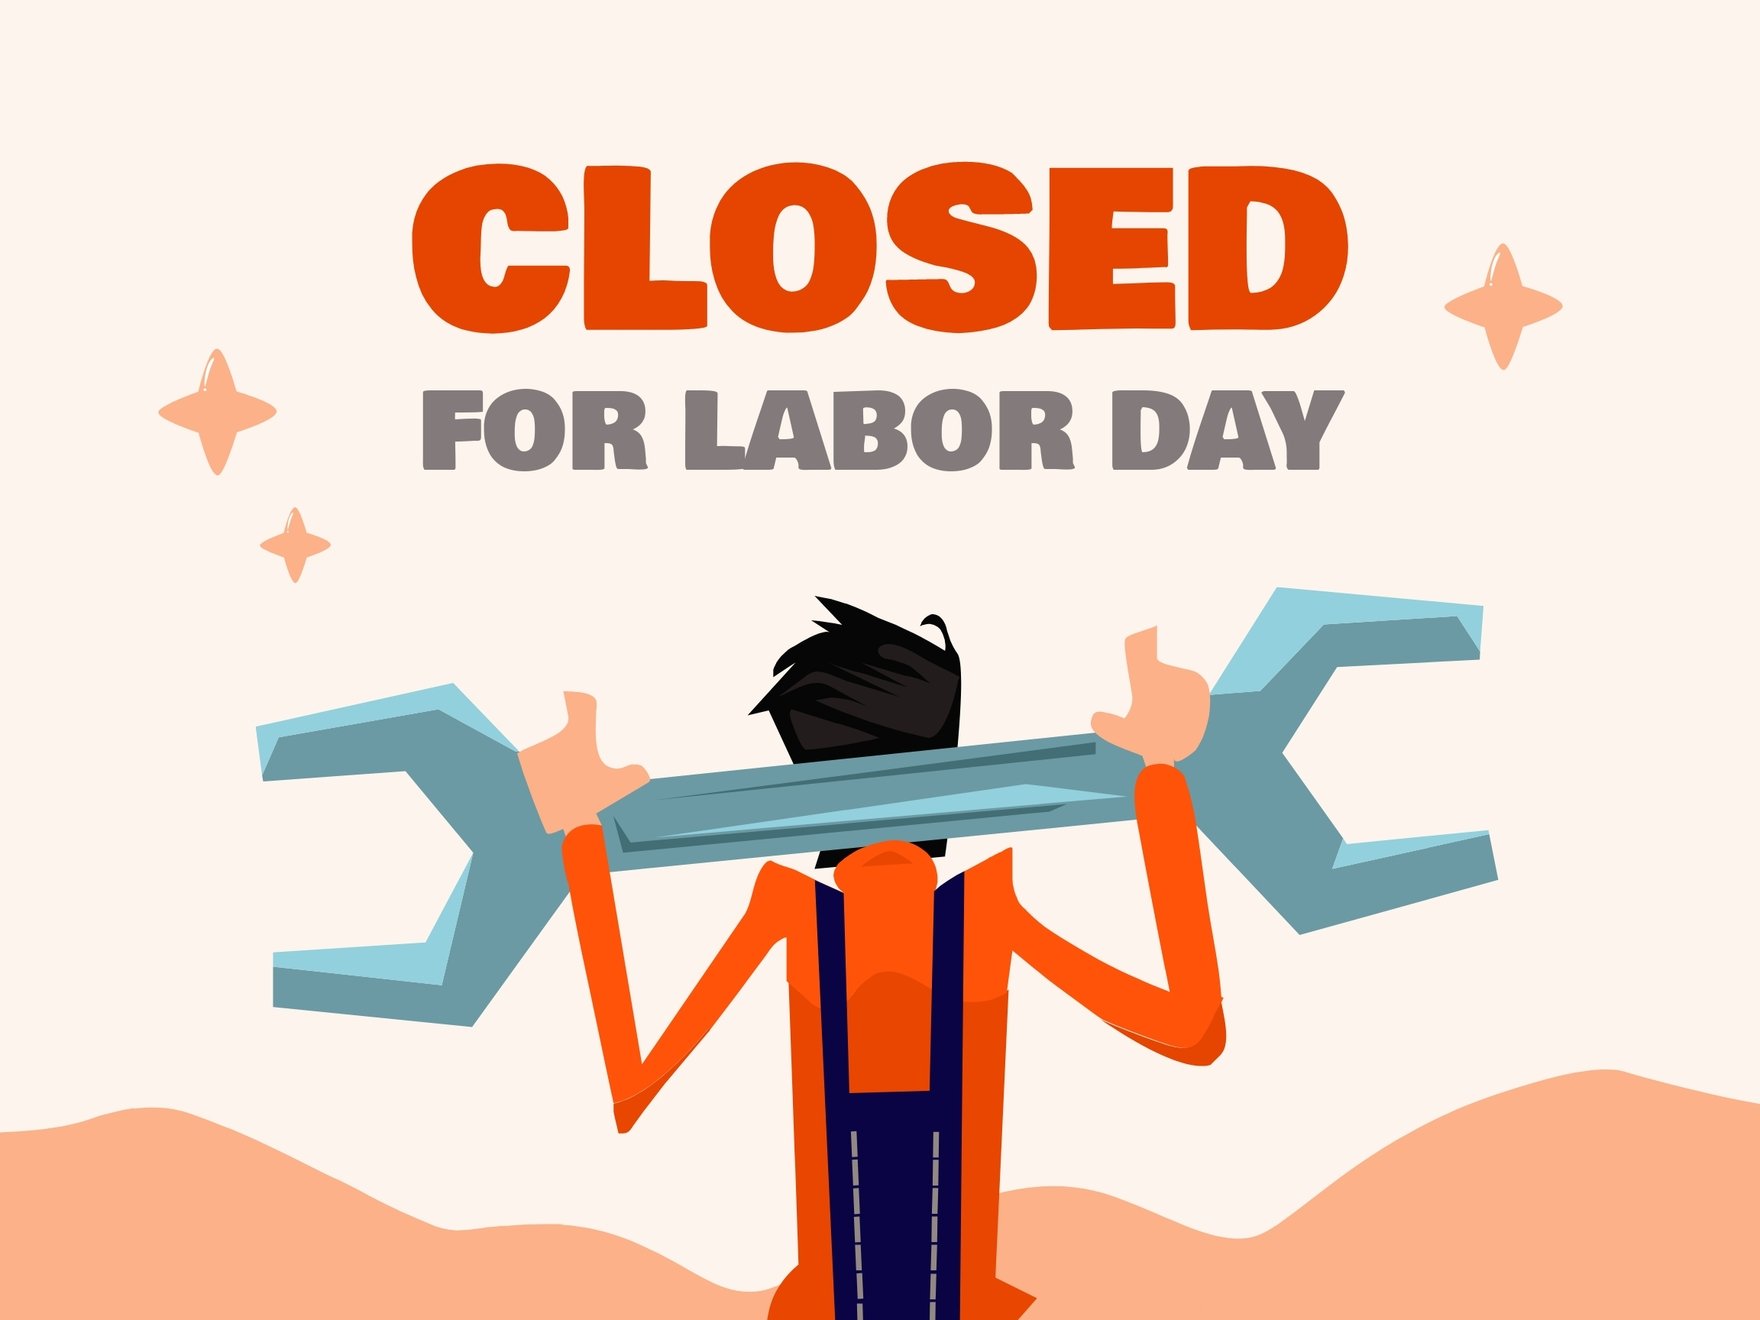 Free Closing For Labor Day Sign Download in PNG, JPG